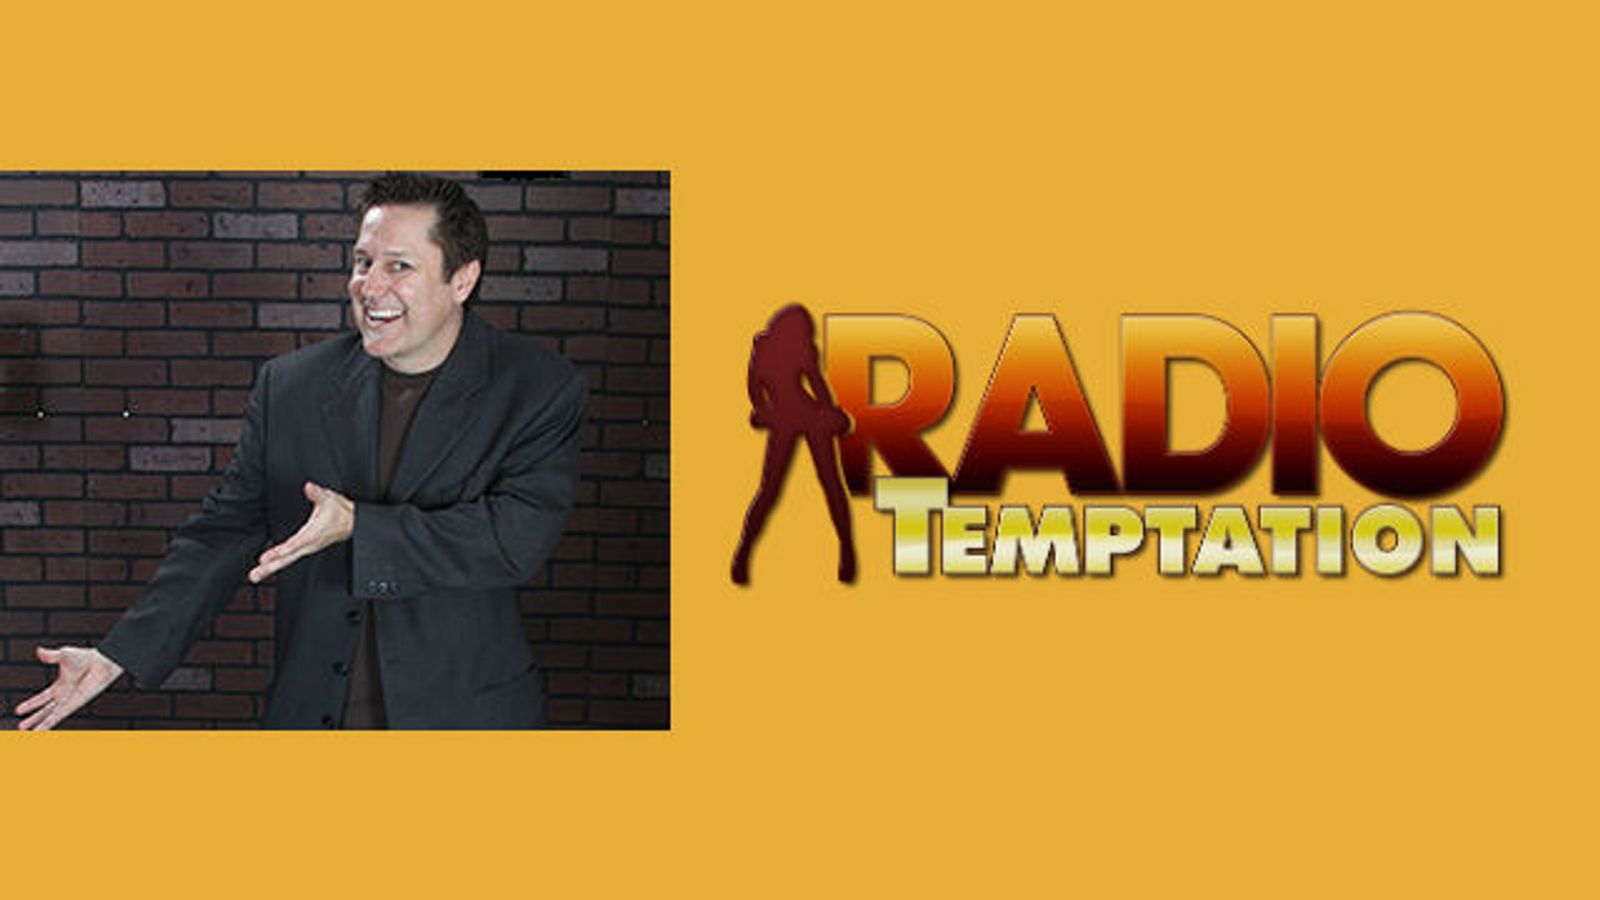 Glenn King to Debut Weekly Show on Radio Temptation July 11